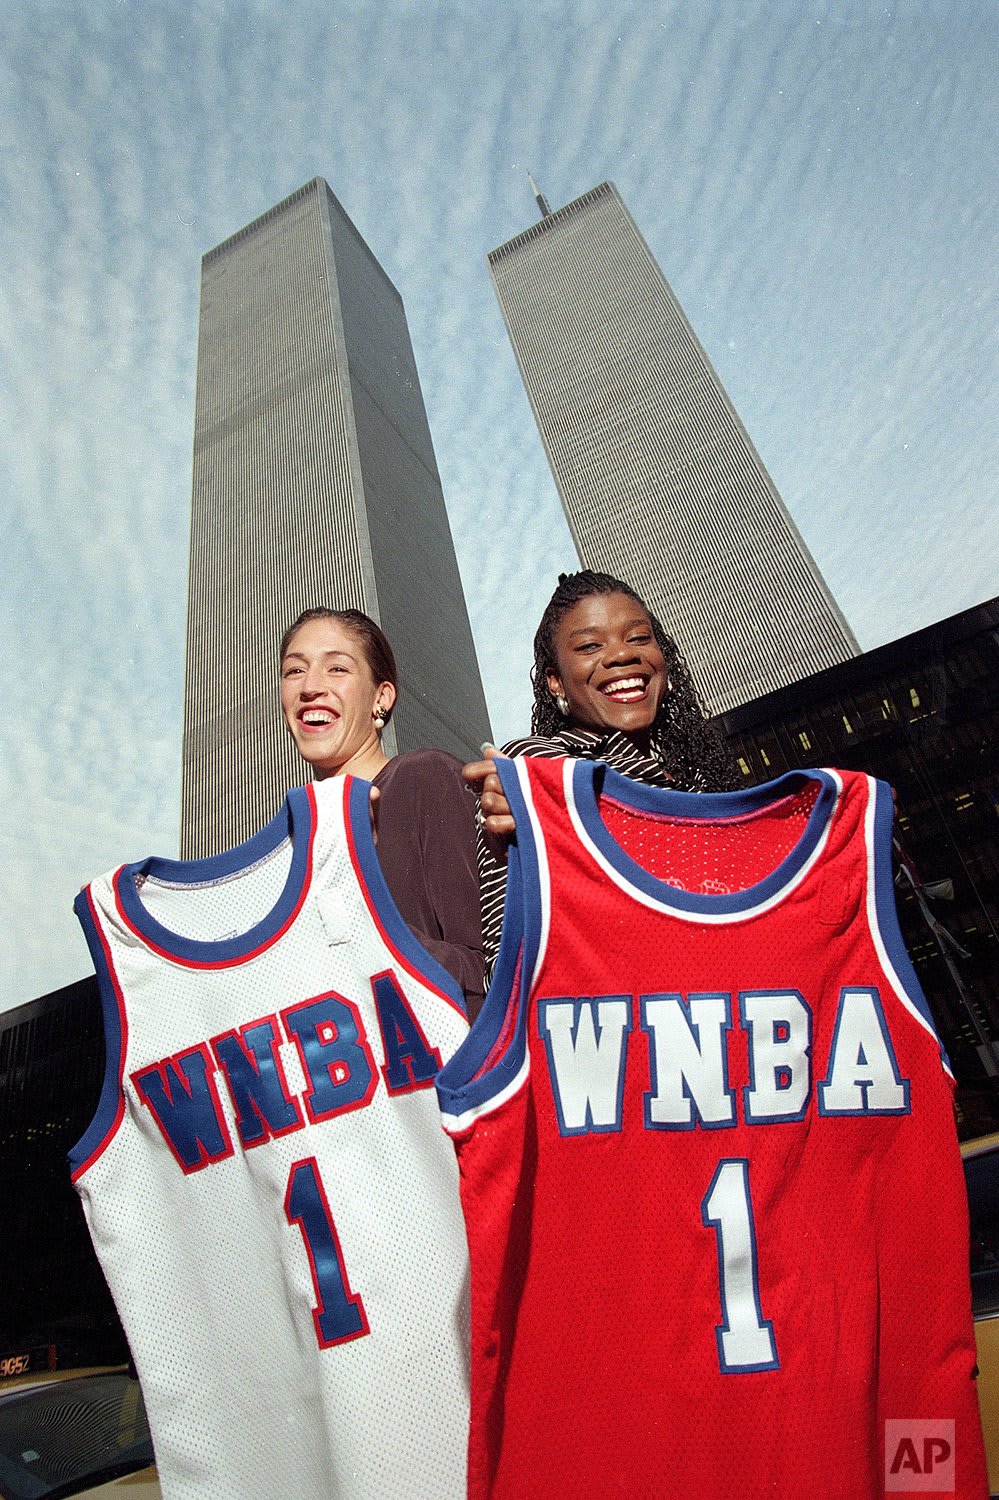 The @WNBA season begins tonight. Olympic gold medalists Rebecca Lobo, left, and Sheryl Swoopes display their jerseys for the inaugural season of the Women's National Basketball Association in the shadow of New York's World Trade Center, in this Oct. 23, 1996 photo.